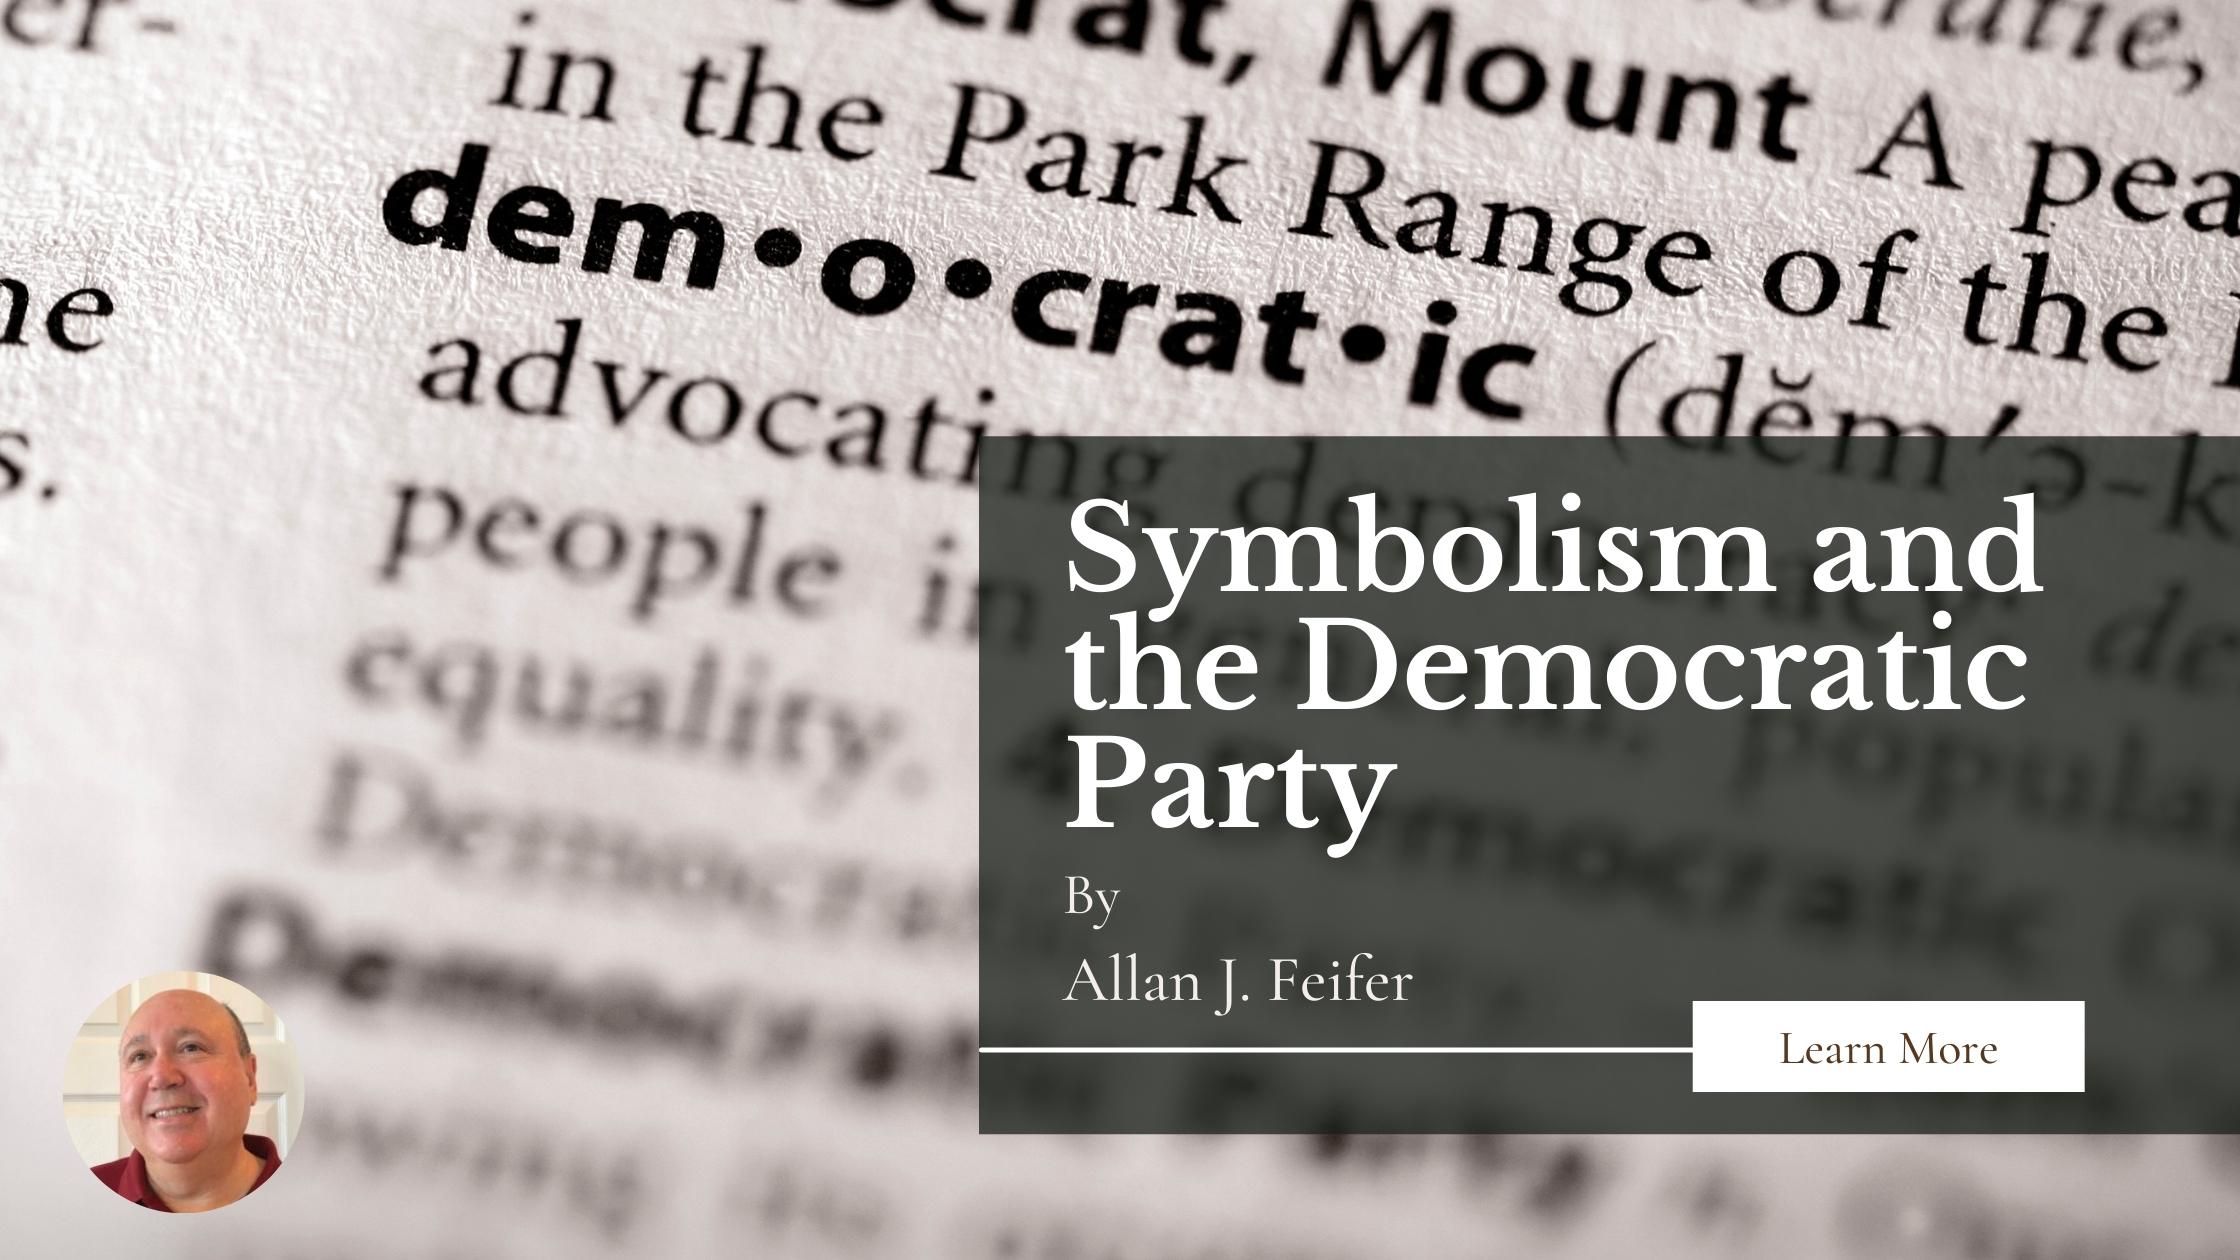 Symbolism and the Democratic Party